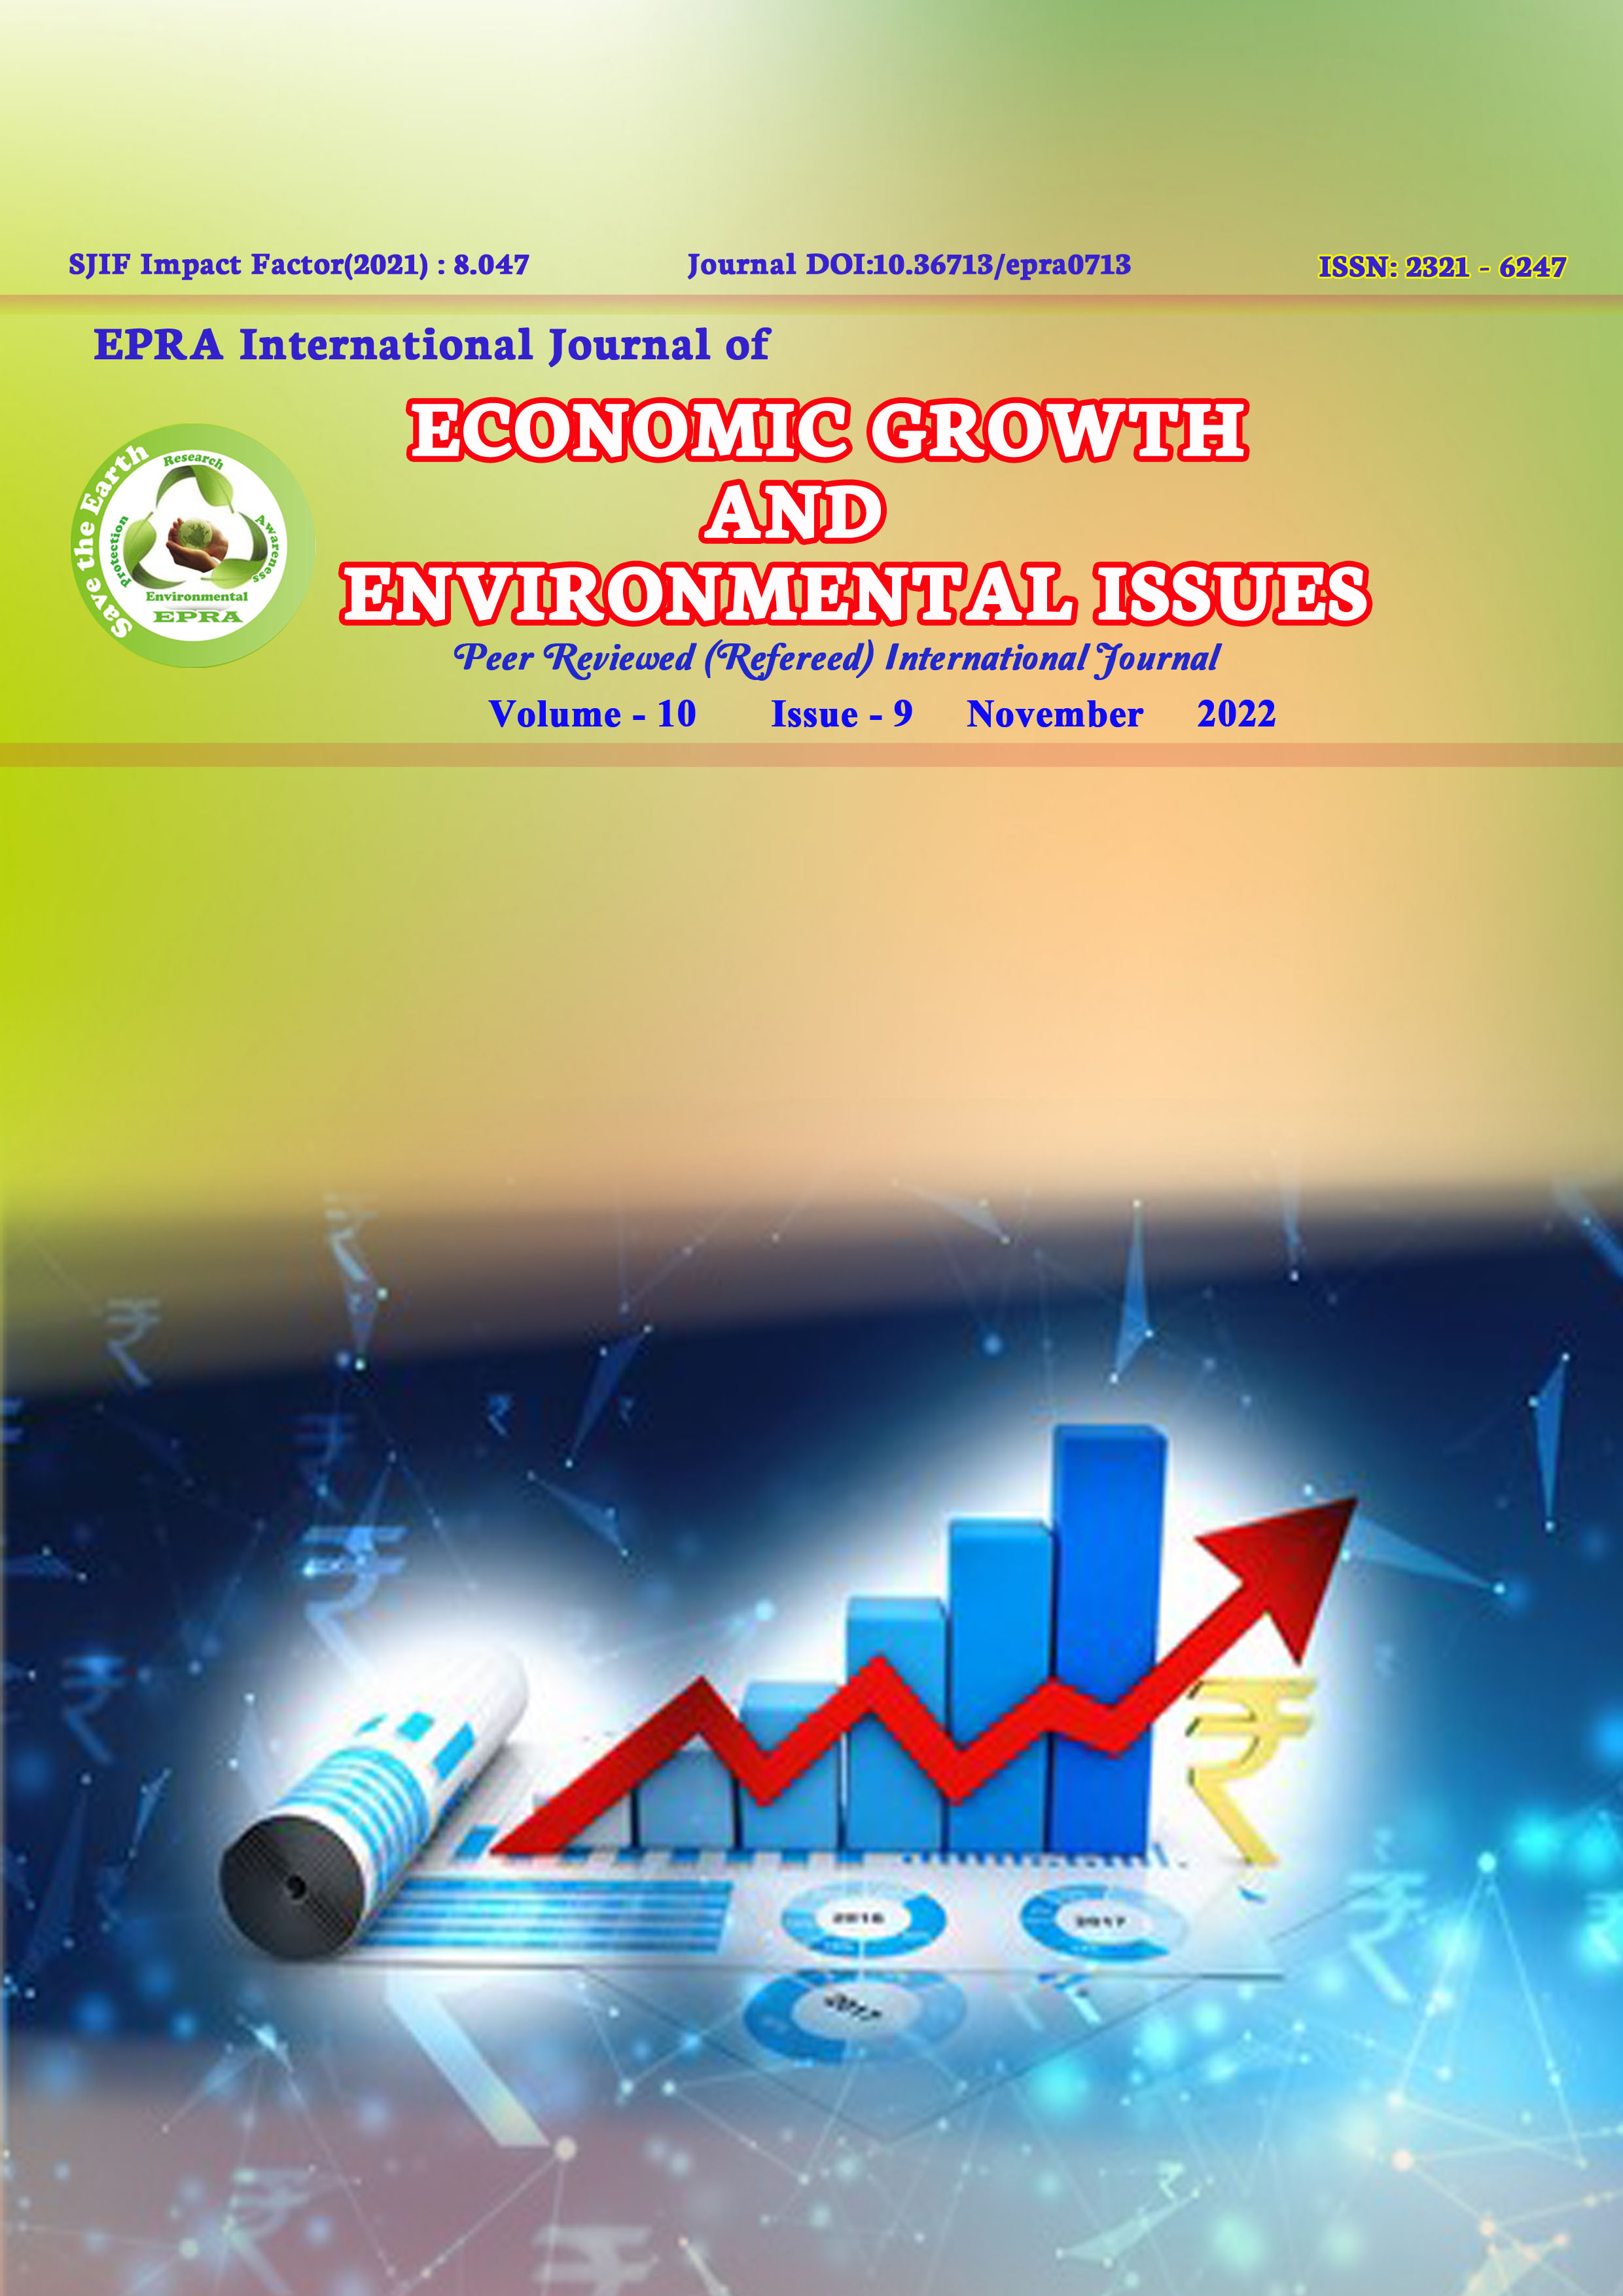 					View Vol. 10 No. 9 (2022): EPRA International Journal of Economic Growth and Environmental Issues (EGEI)
				